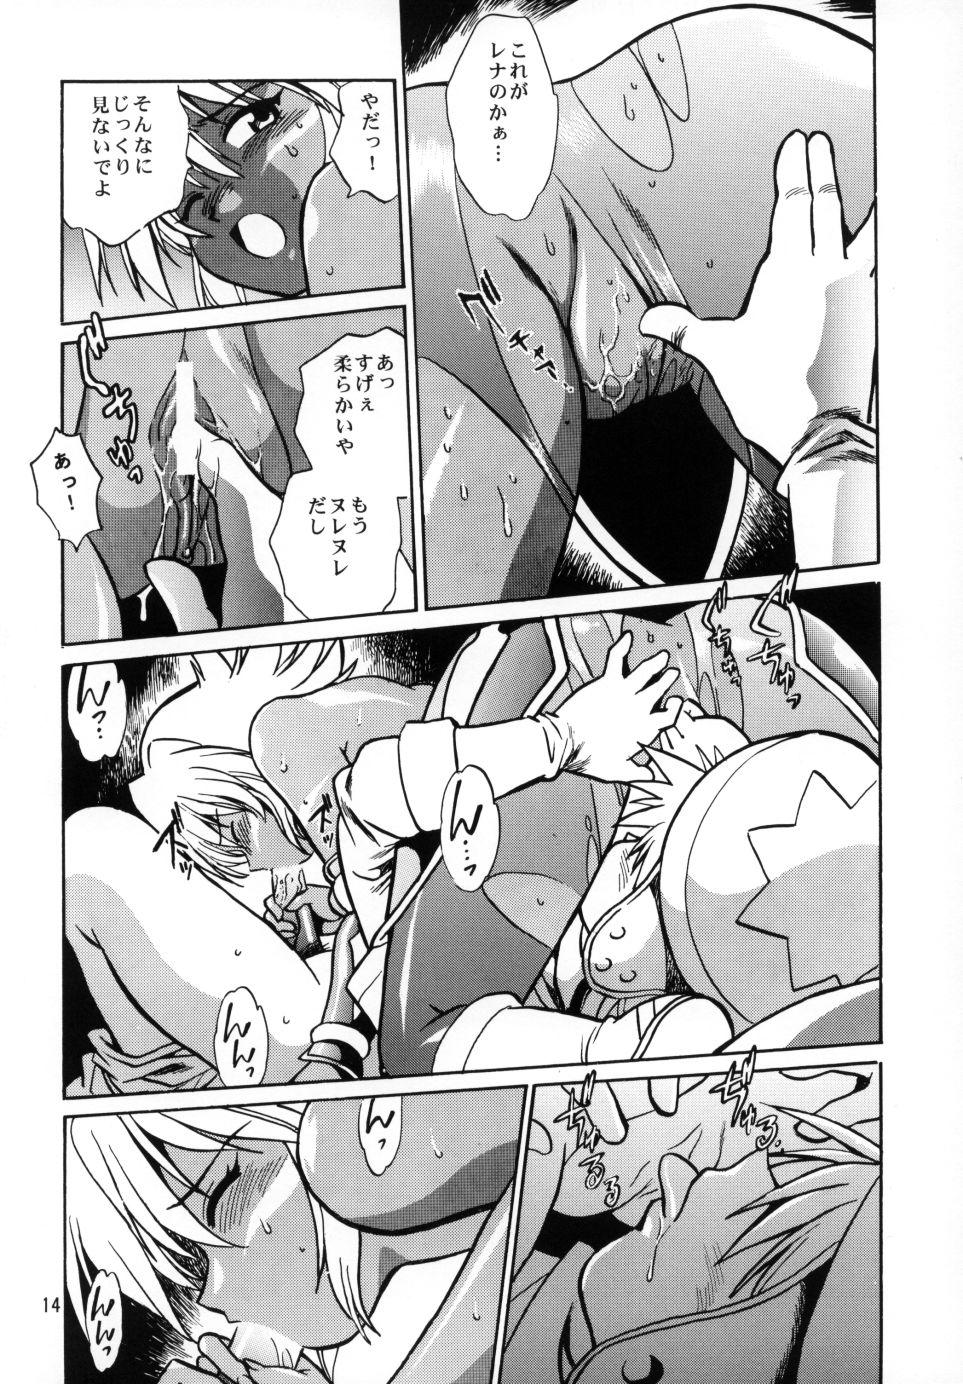 Periscope .hack//extra - .hacklegend of the twilight Dildo - Page 13